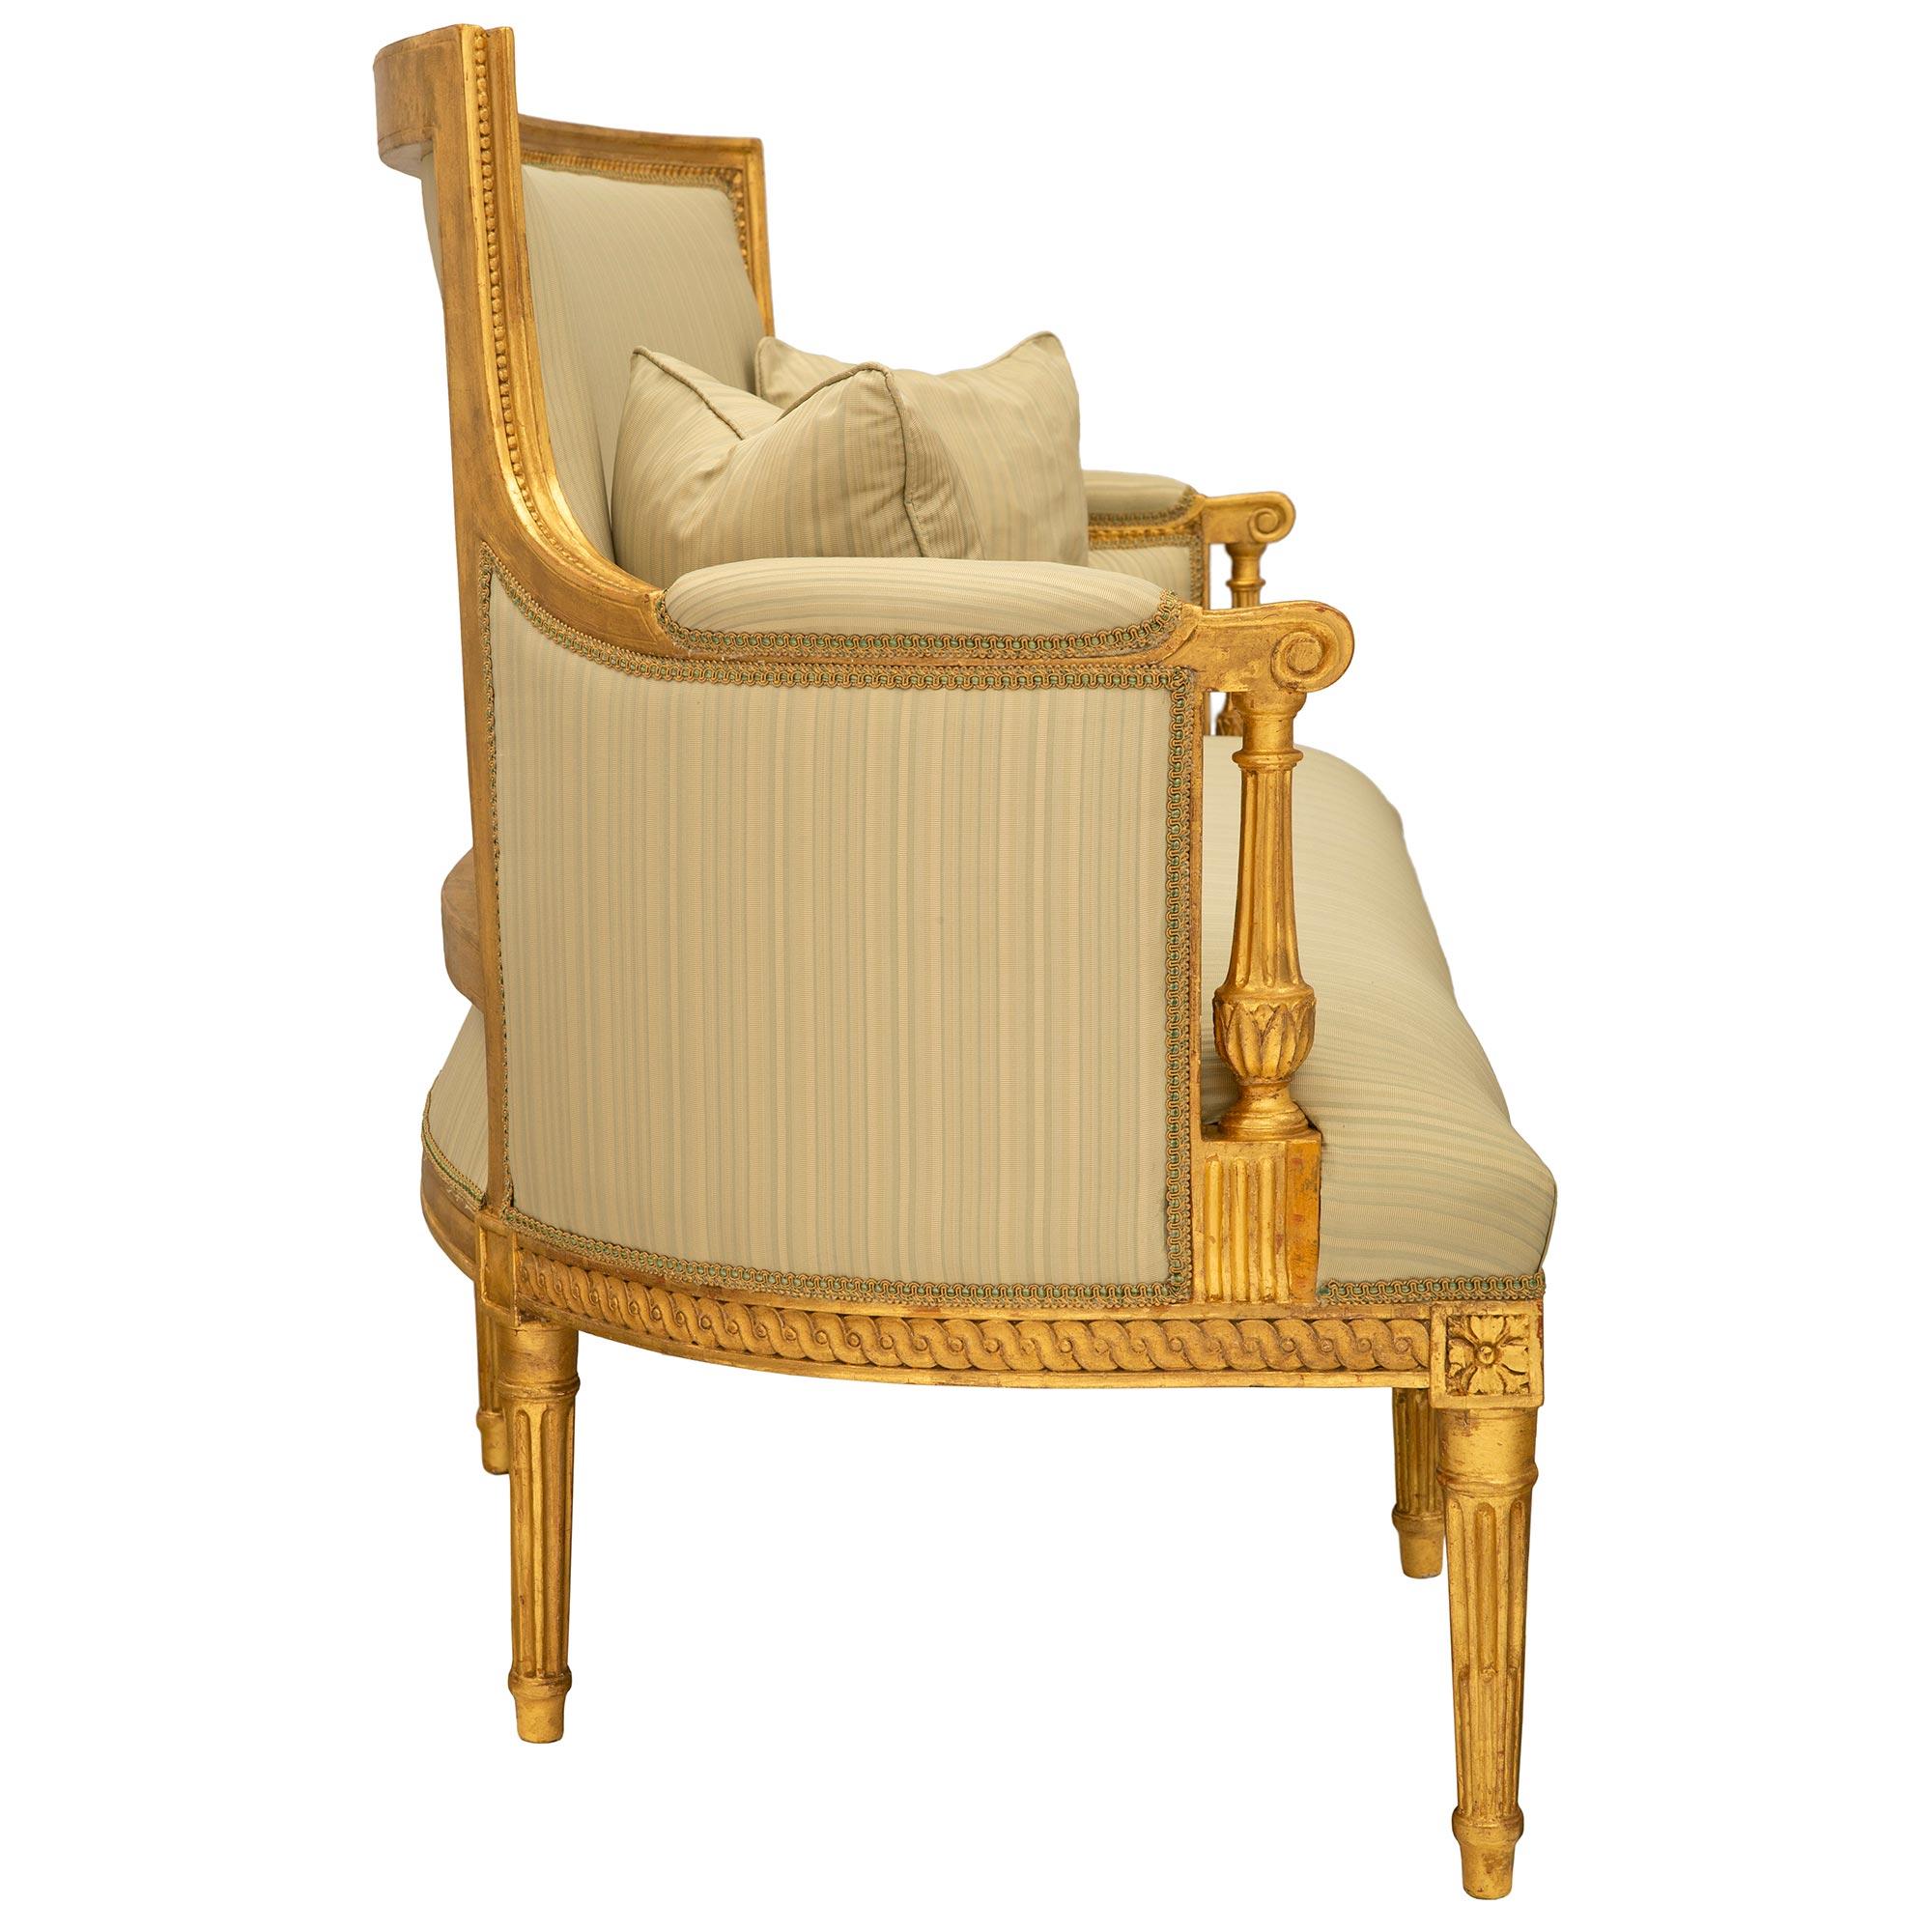 French 18th Century Louis XVI Period Giltwood Canapé Settee In Good Condition For Sale In West Palm Beach, FL